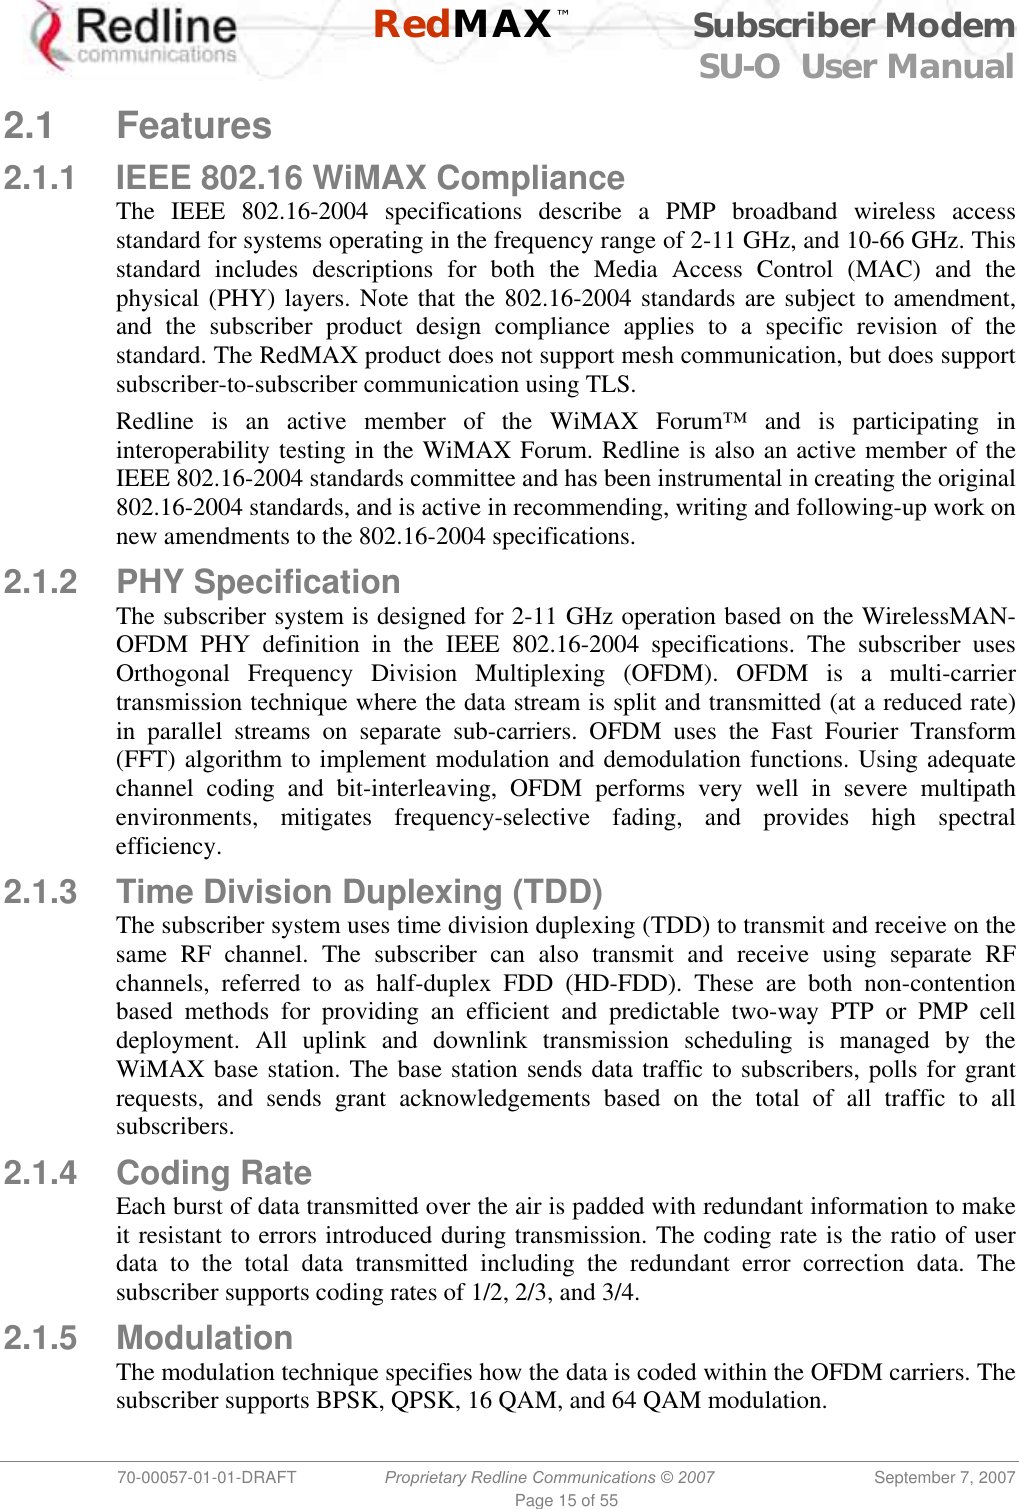    RedMAX™ Subscriber Modem SU-O  User Manual  70-00057-01-01-DRAFT  Proprietary Redline Communications © 2007 September 7, 2007 Page 15 of 55  2.1 Features 2.1.1  IEEE 802.16 WiMAX Compliance The IEEE 802.16-2004 specifications describe a PMP broadband wireless access standard for systems operating in the frequency range of 2-11 GHz, and 10-66 GHz. This standard includes descriptions for both the Media Access Control (MAC) and the physical (PHY) layers. Note that the 802.16-2004 standards are subject to amendment, and the subscriber product design compliance applies to a specific revision of the standard. The RedMAX product does not support mesh communication, but does support subscriber-to-subscriber communication using TLS. Redline is an active member of the WiMAX Forum™ and is participating in interoperability testing in the WiMAX Forum. Redline is also an active member of the IEEE 802.16-2004 standards committee and has been instrumental in creating the original 802.16-2004 standards, and is active in recommending, writing and following-up work on new amendments to the 802.16-2004 specifications.  2.1.2 PHY Specification The subscriber system is designed for 2-11 GHz operation based on the WirelessMAN-OFDM PHY definition in the IEEE 802.16-2004 specifications. The subscriber uses Orthogonal Frequency Division Multiplexing (OFDM). OFDM is a multi-carrier transmission technique where the data stream is split and transmitted (at a reduced rate) in parallel streams on separate sub-carriers. OFDM uses the Fast Fourier Transform (FFT) algorithm to implement modulation and demodulation functions. Using adequate channel coding and bit-interleaving, OFDM performs very well in severe multipath environments, mitigates frequency-selective fading, and provides high spectral efficiency. 2.1.3  Time Division Duplexing (TDD) The subscriber system uses time division duplexing (TDD) to transmit and receive on the same RF channel. The subscriber can also transmit and receive using separate RF channels, referred to as half-duplex FDD (HD-FDD). These are both non-contention based methods for providing an efficient and predictable two-way PTP or PMP cell deployment. All uplink and downlink transmission scheduling is managed by the WiMAX base station. The base station sends data traffic to subscribers, polls for grant requests, and sends grant acknowledgements based on the total of all traffic to all subscribers. 2.1.4 Coding Rate Each burst of data transmitted over the air is padded with redundant information to make it resistant to errors introduced during transmission. The coding rate is the ratio of user data to the total data transmitted including the redundant error correction data. The subscriber supports coding rates of 1/2, 2/3, and 3/4. 2.1.5 Modulation The modulation technique specifies how the data is coded within the OFDM carriers. The subscriber supports BPSK, QPSK, 16 QAM, and 64 QAM modulation. 